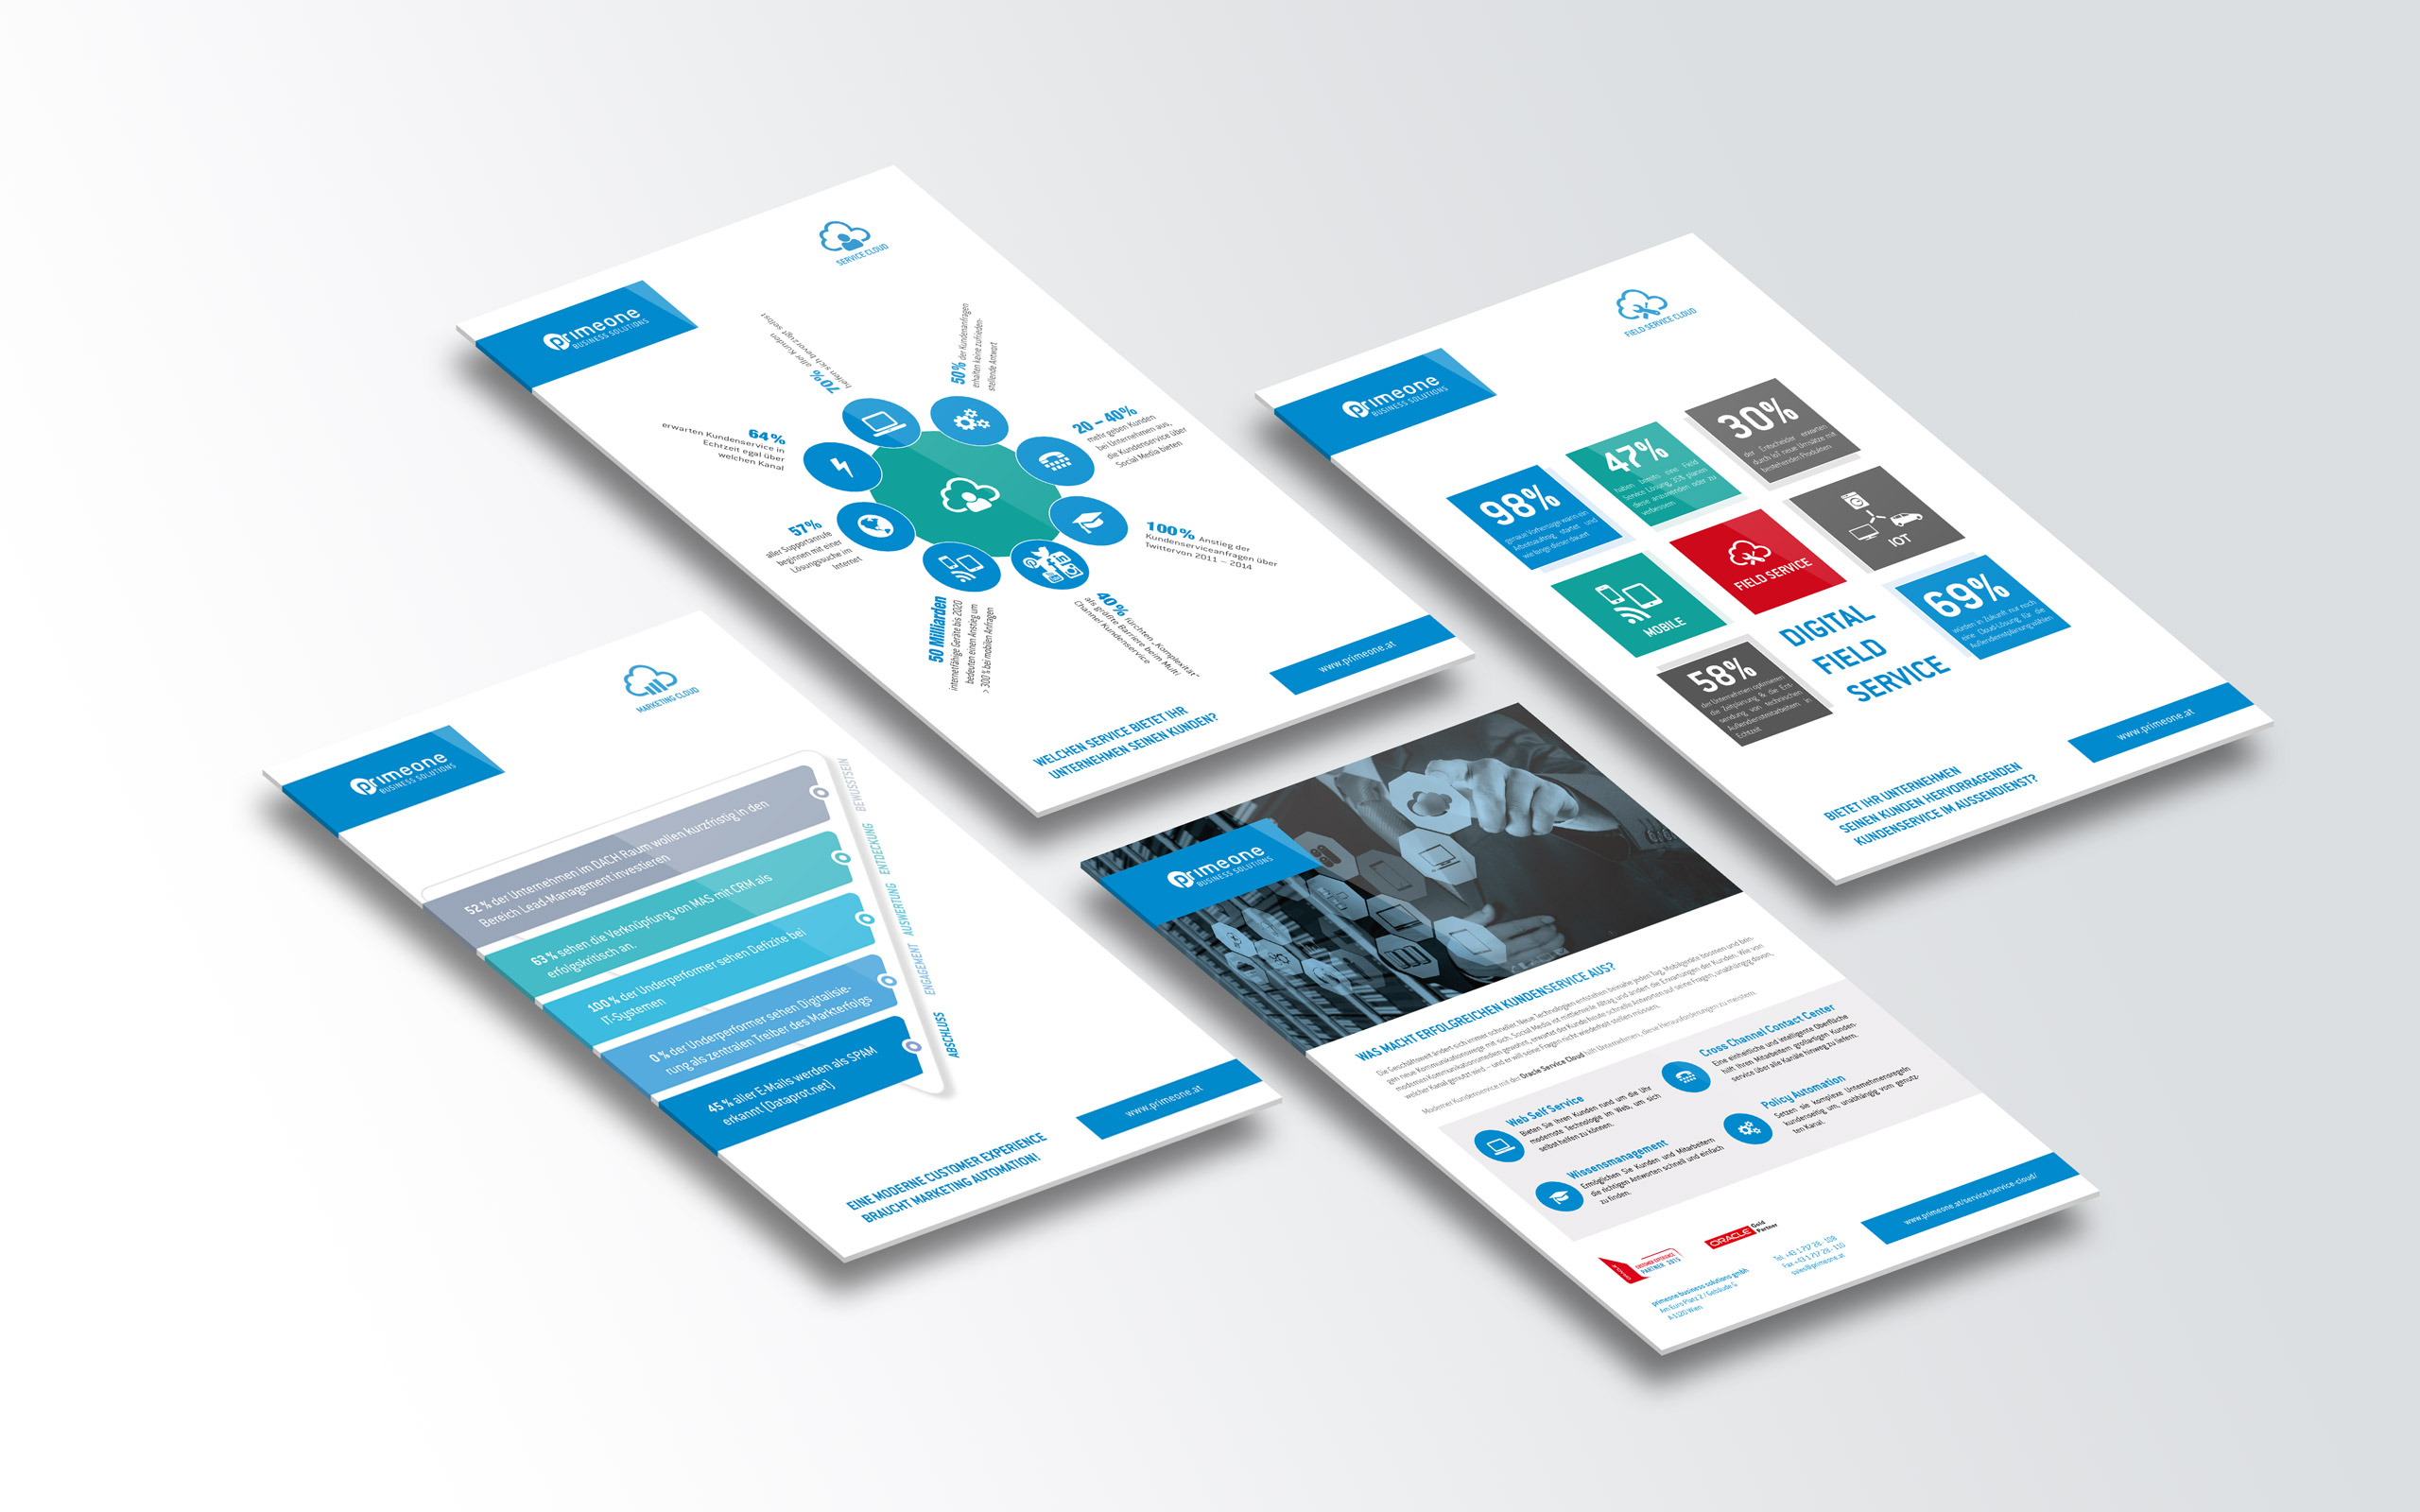 Folder_A4-by-PiKSEL-primeone-business-solutions